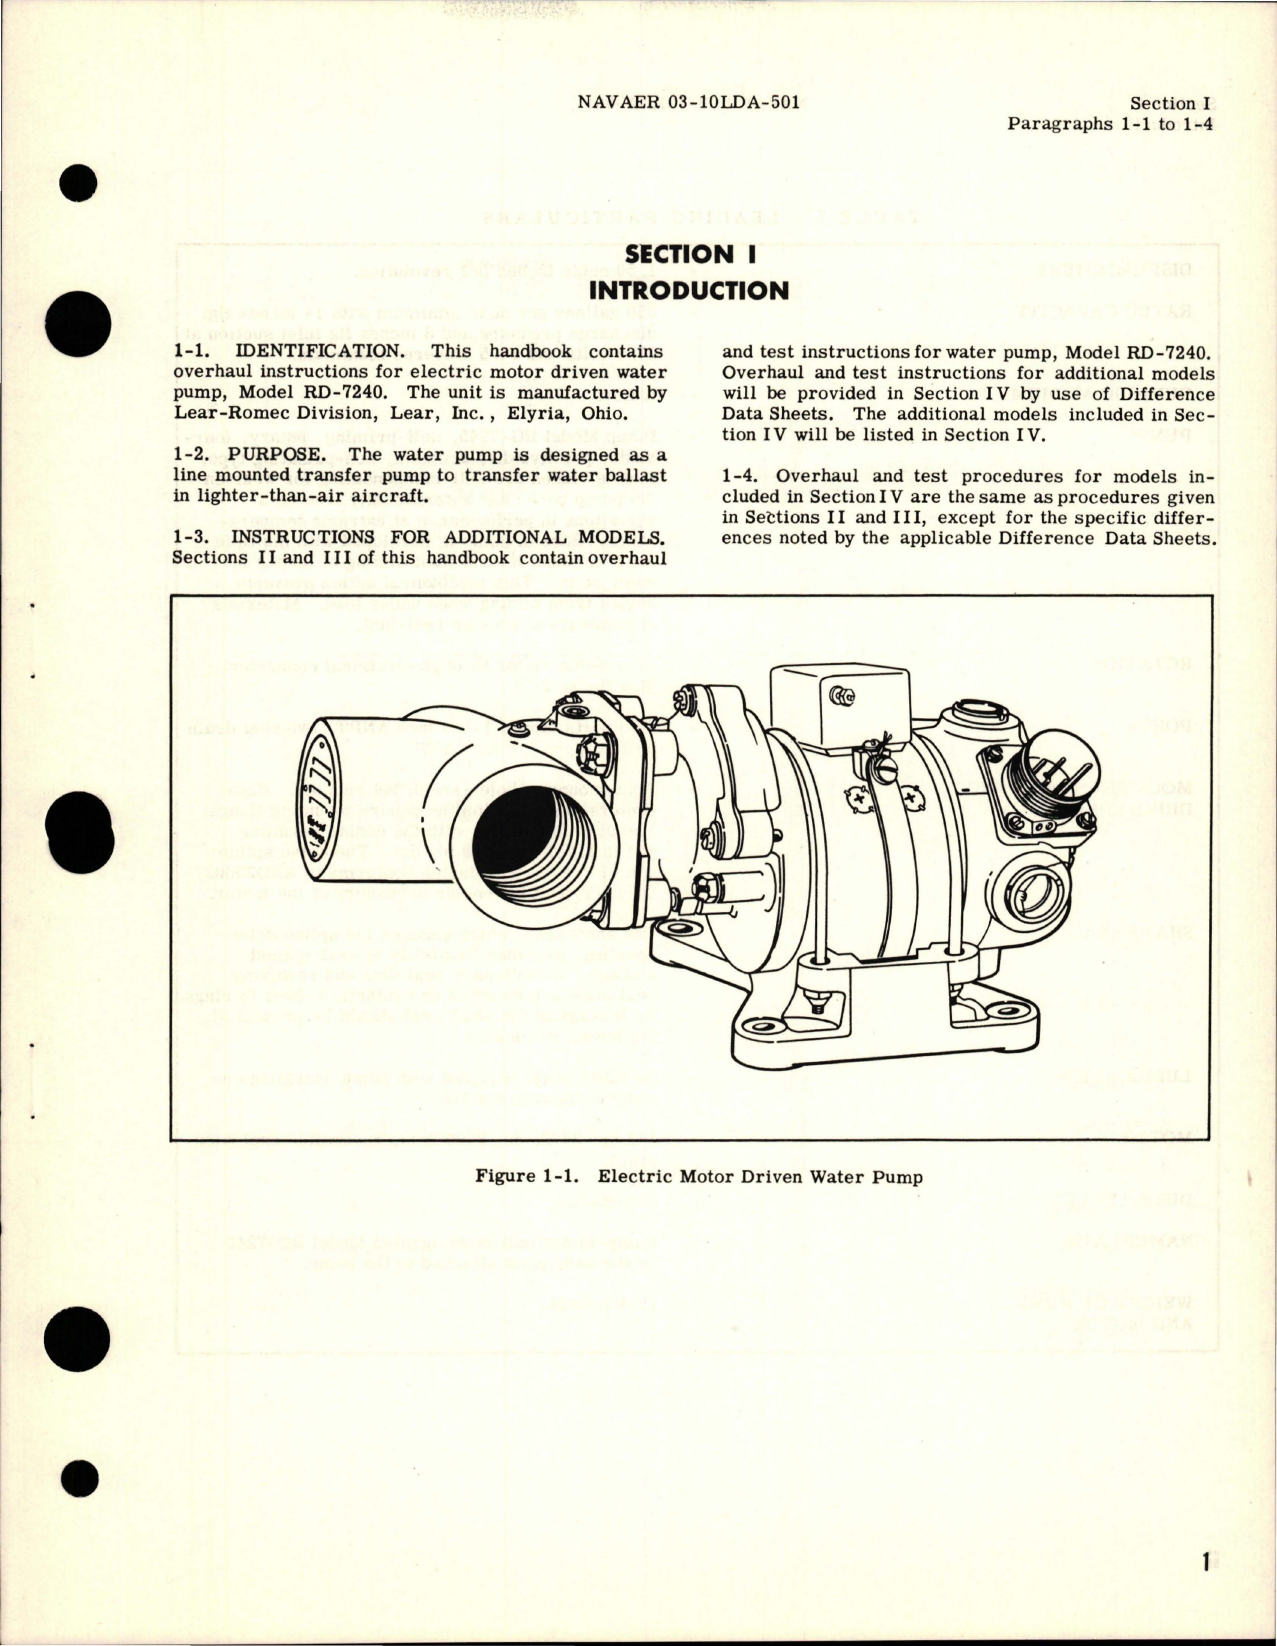 Sample page 5 from AirCorps Library document: Overhaul Instructions for Electric Motor Driven Water Pump - Model RD-7240